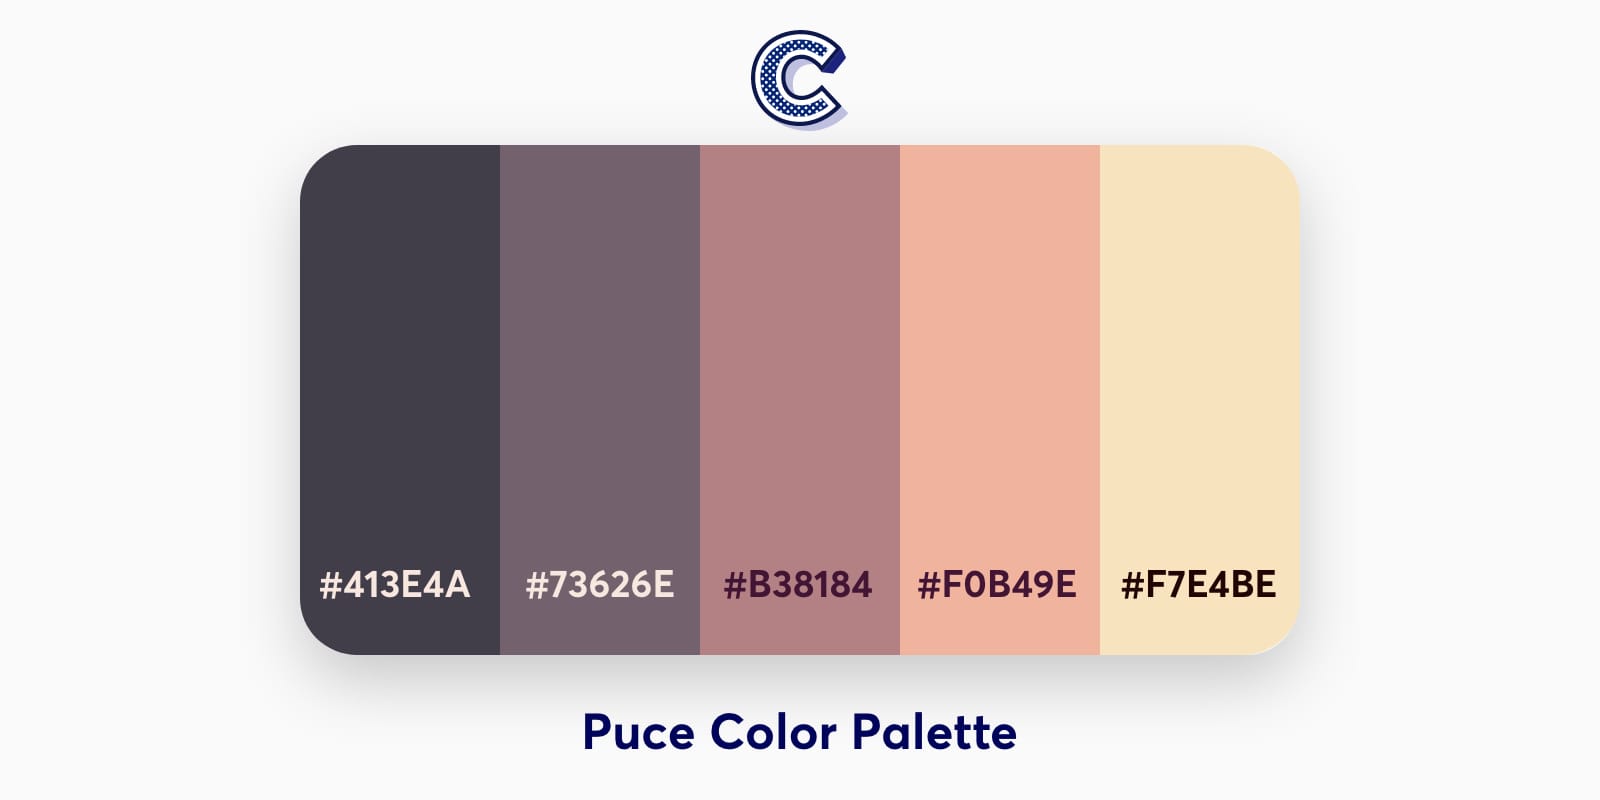 the featured image of puce color palette